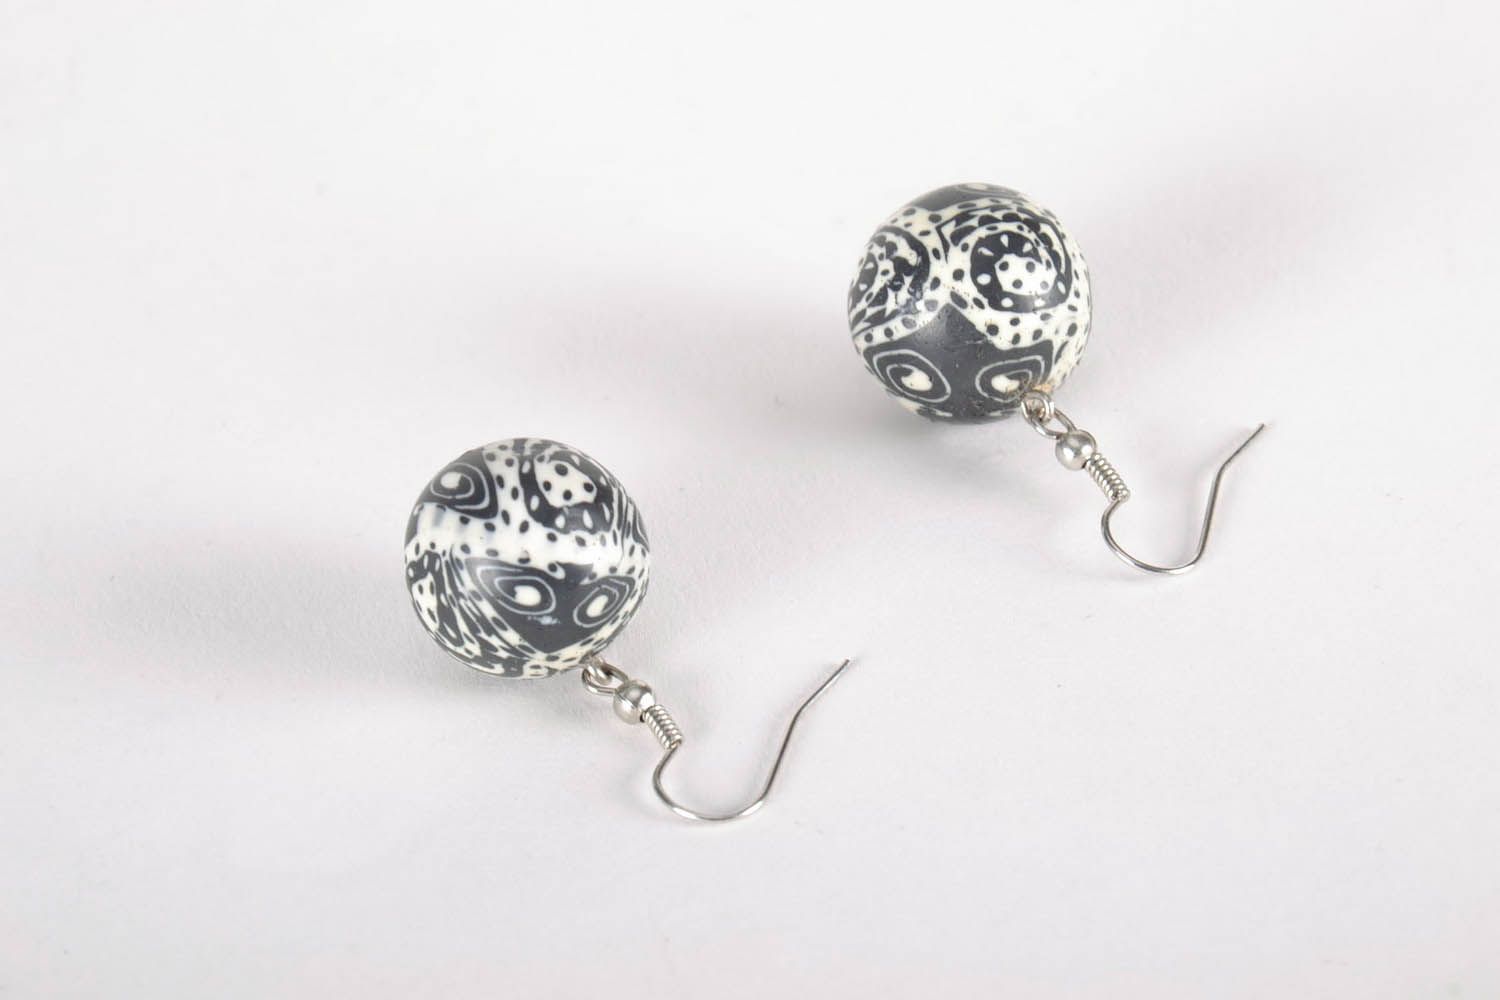 Ball-earrings made of polymer clay photo 1